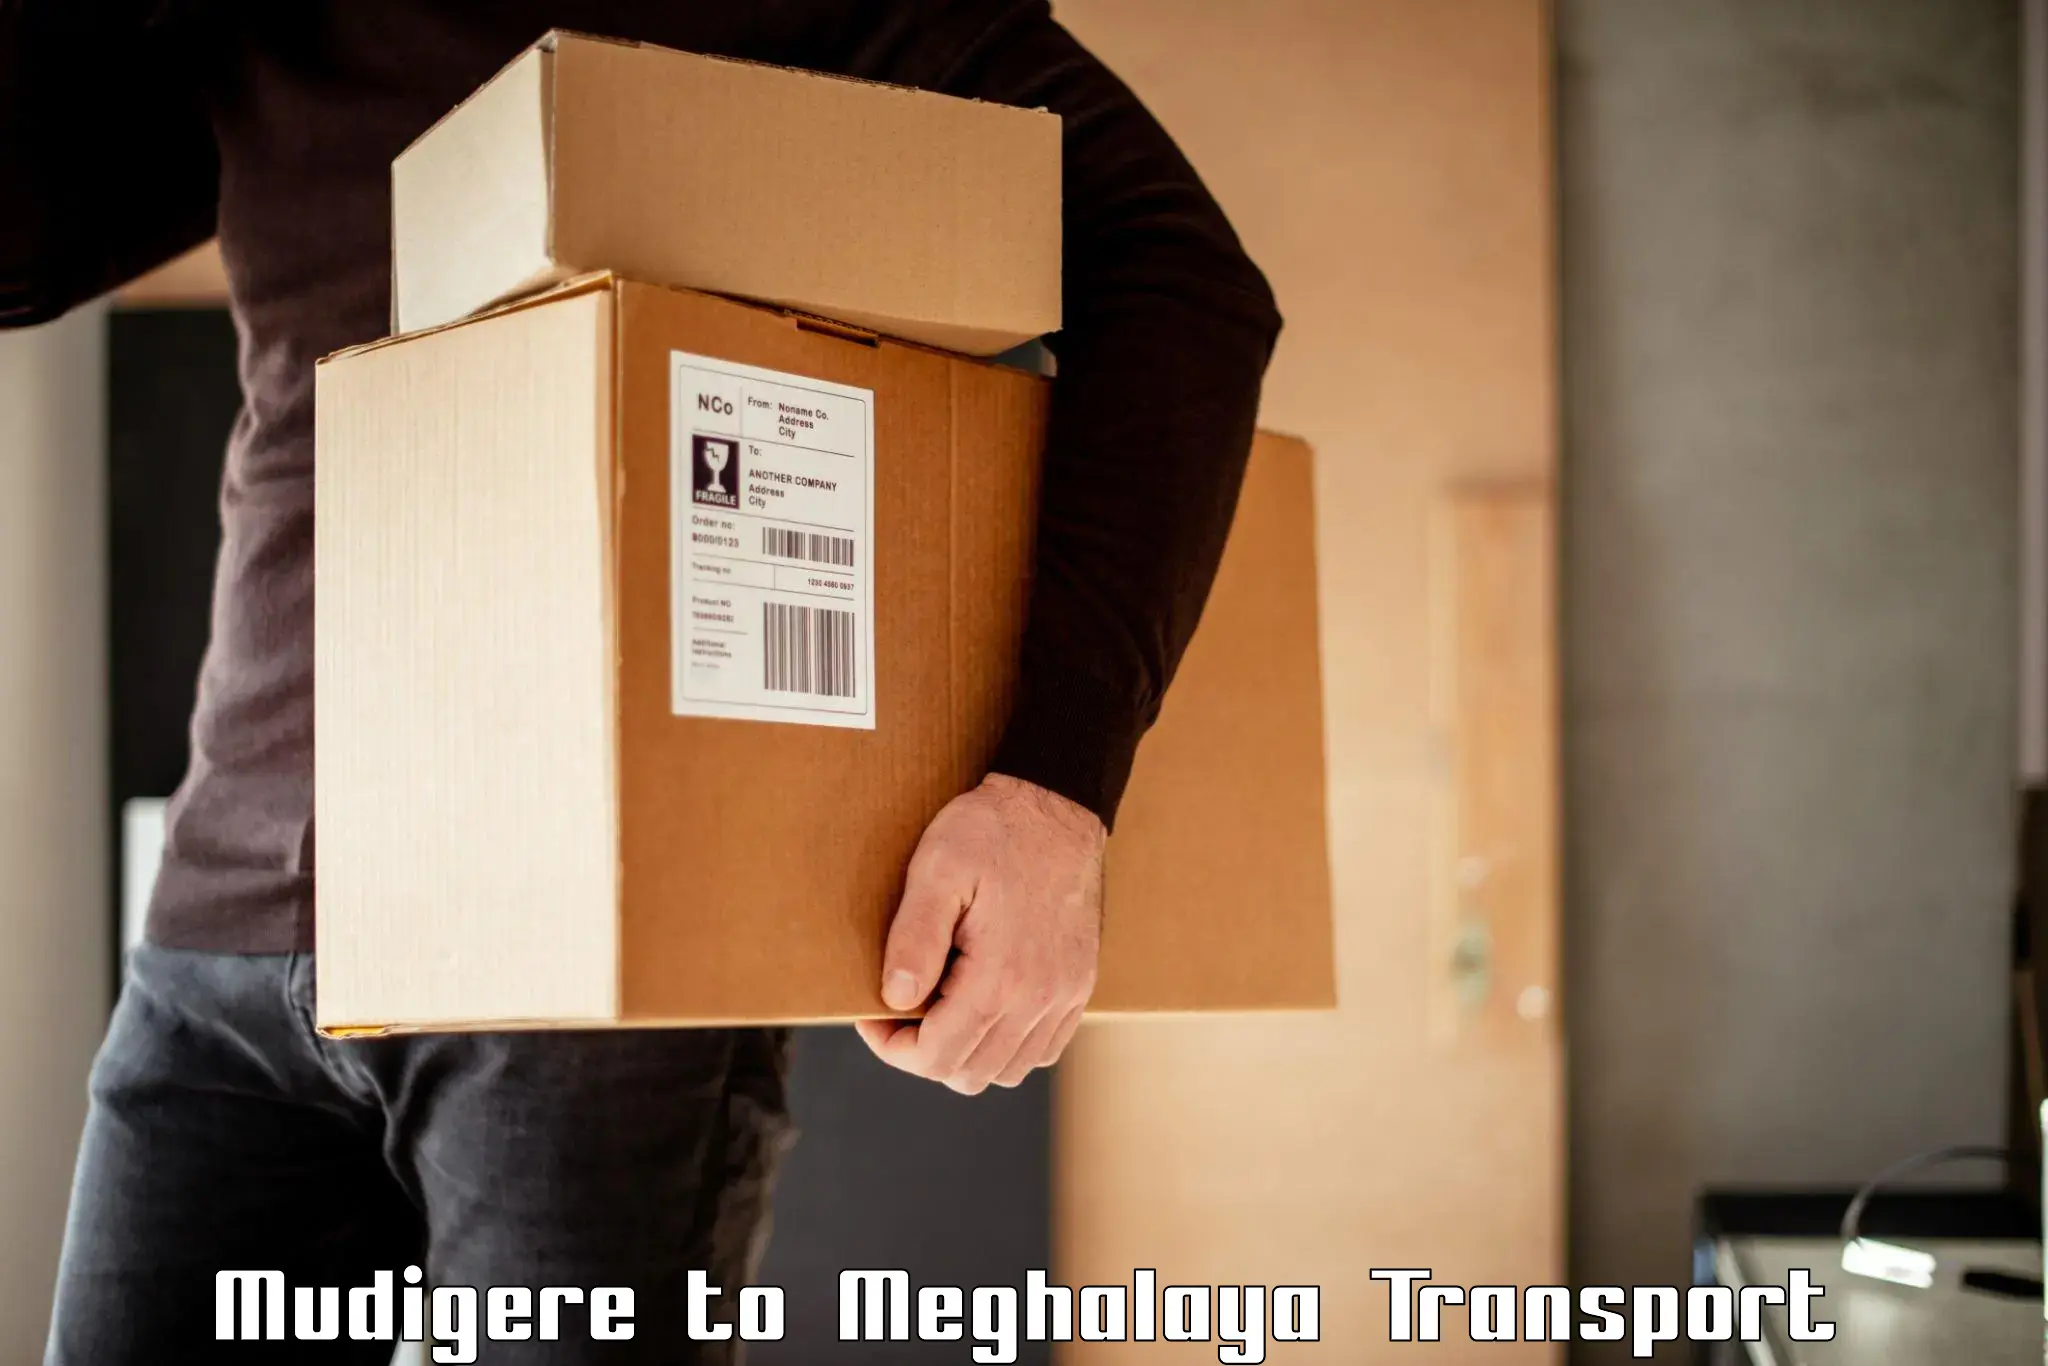 Container transport service Mudigere to Meghalaya